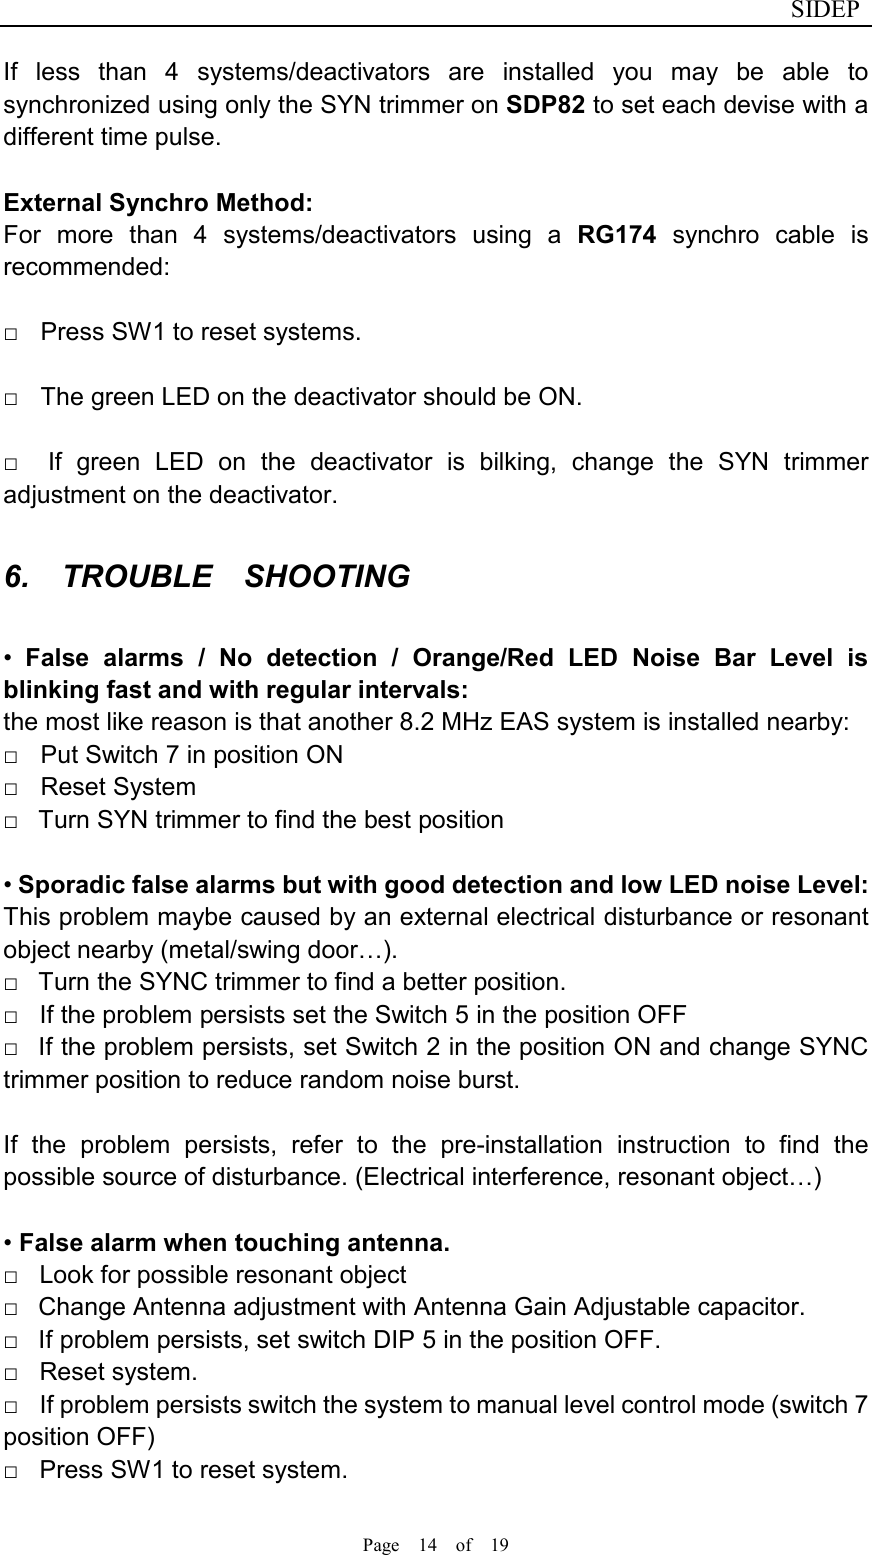                              SIDEP Page    14    of    19   If  less  than  4  systems/deactivators  are  installed  you  may  be  able  to synchronized using only the SYN trimmer on SDP82 to set each devise with a different time pulse.      External Synchro Method:   For  more  than  4  systems/deactivators  using  a  RG174  synchro  cable  is recommended:  □    Press SW1 to reset systems.    □    The green LED on the deactivator should be ON.    □    If  green  LED  on  the  deactivator  is  bilking,  change  the  SYN  trimmer adjustment on the deactivator.  6.    TROUBLE    SHOOTING  •  False  alarms  /  No  detection  /  Orange/Red  LED  Noise  Bar  Level  is blinking fast and with regular intervals:   the most like reason is that another 8.2 MHz EAS system is installed nearby: □    Put Switch 7 in position ON   □    Reset System   □    Turn SYN trimmer to find the best position    • Sporadic false alarms but with good detection and low LED noise Level: This problem maybe caused by an external electrical disturbance or resonant object nearby (metal/swing door…). □    Turn the SYNC trimmer to find a better position.   □    If the problem persists set the Switch 5 in the position OFF   □    If the problem persists, set Switch 2 in the position ON and change SYNC trimmer position to reduce random noise burst.    If  the  problem  persists,  refer  to  the  pre-installation  instruction  to  find  the possible source of disturbance. (Electrical interference, resonant object…)    • False alarm when touching antenna.   □    Look for possible resonant object   □    Change Antenna adjustment with Antenna Gain Adjustable capacitor.   □    If problem persists, set switch DIP 5 in the position OFF.   □    Reset system. □    If problem persists switch the system to manual level control mode (switch 7 position OFF)   □    Press SW1 to reset system.   